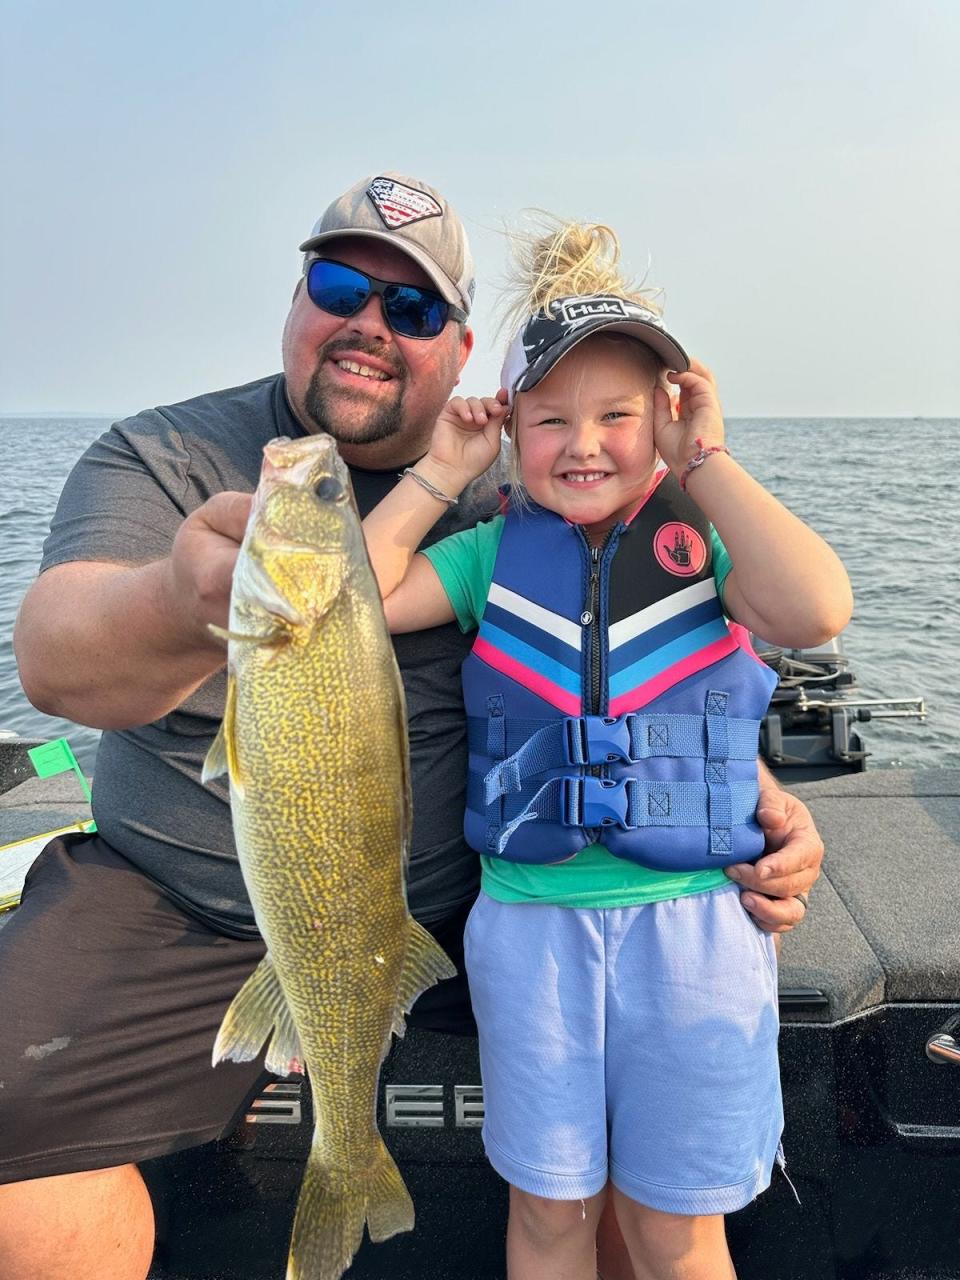 Tim Wollak and his daughter Henley catch game fish on Lake Michigan. Their shared hobby led to their discovery of a long-lost shipwreck that's more than 150 years old.